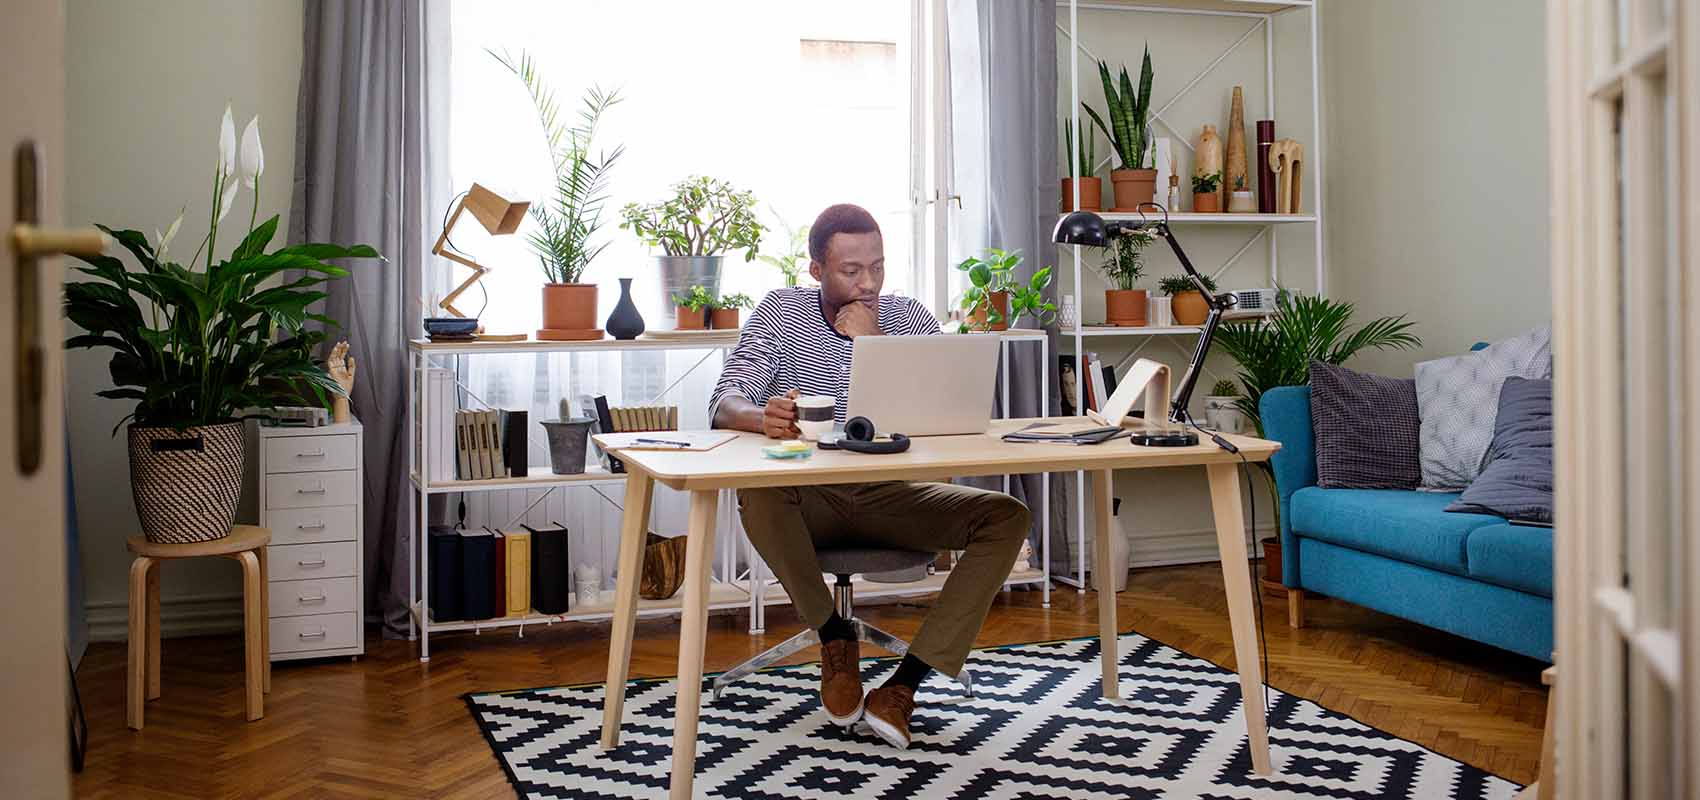 Man working on laptop at home office